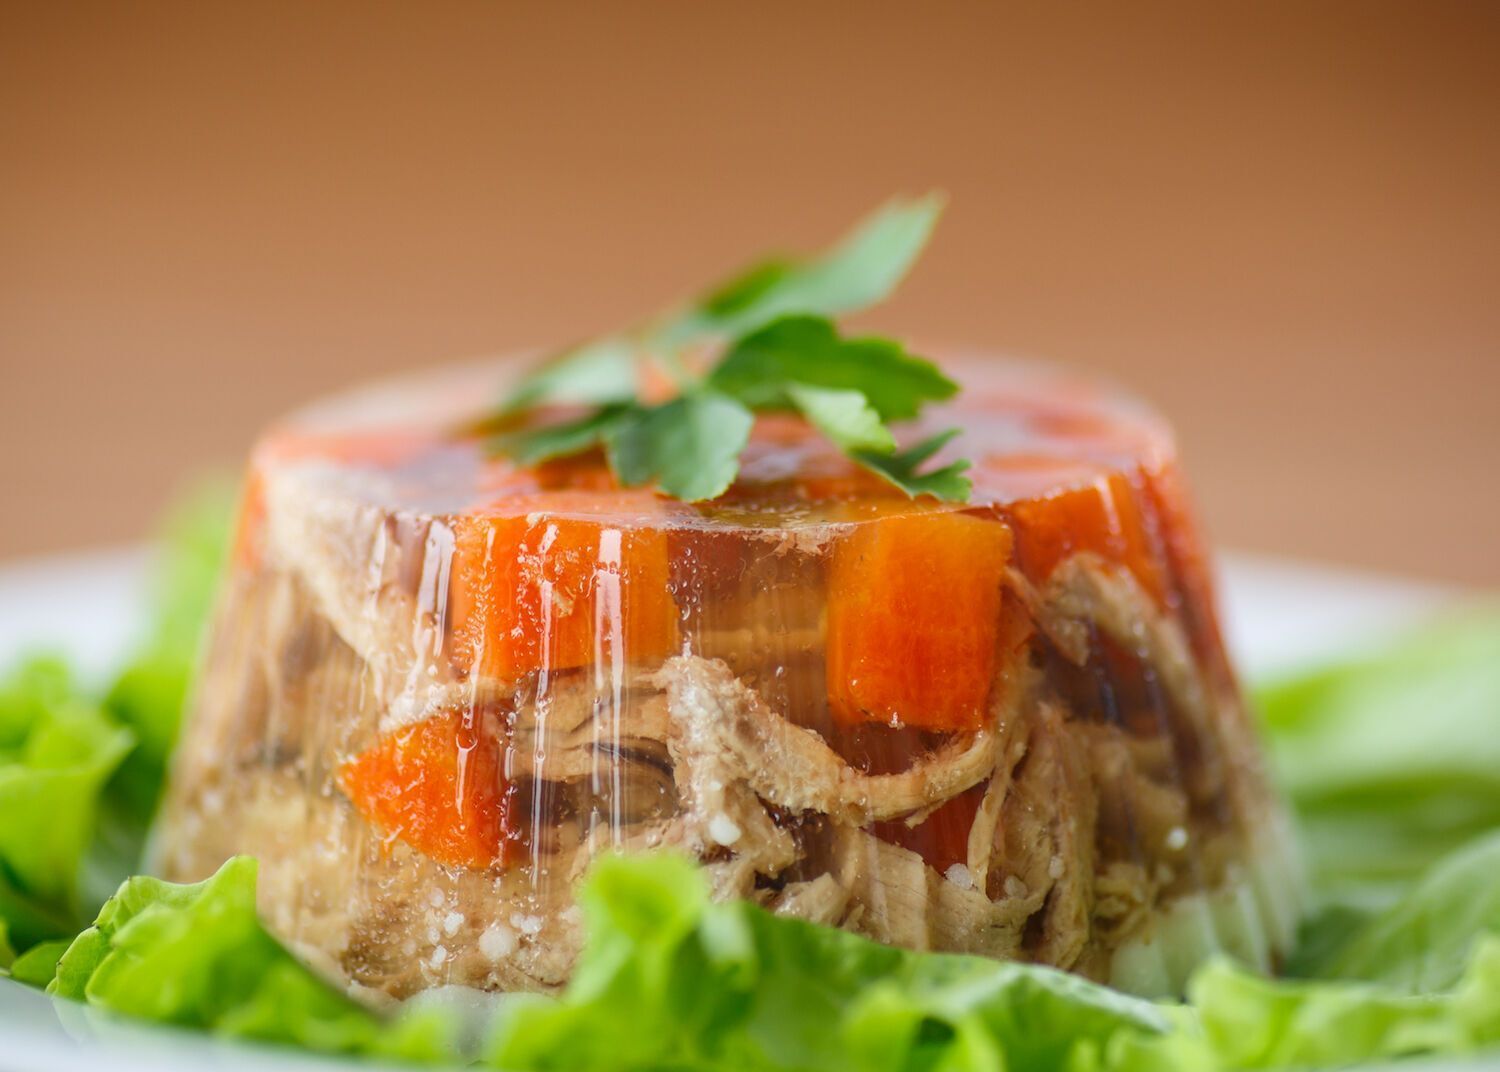 Aspic will be transparent and hearty: the secret of the perfect dish